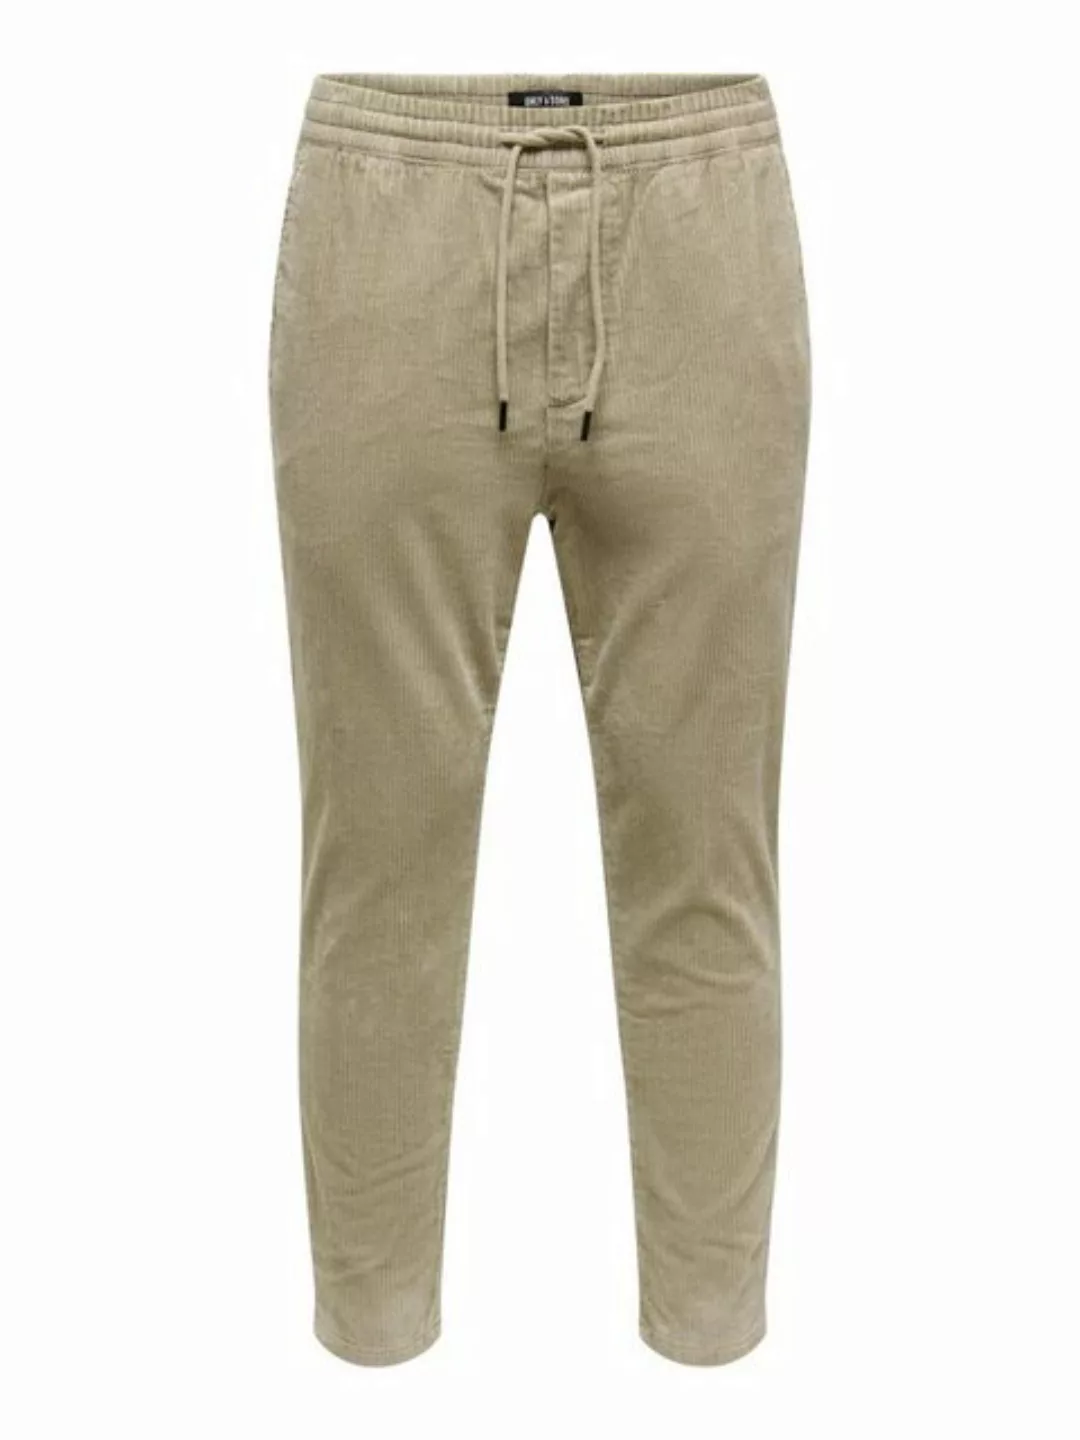 ONLY & SONS Stoffhose ONSLINUS CROPPED CORD 9912 PANT NOO günstig online kaufen